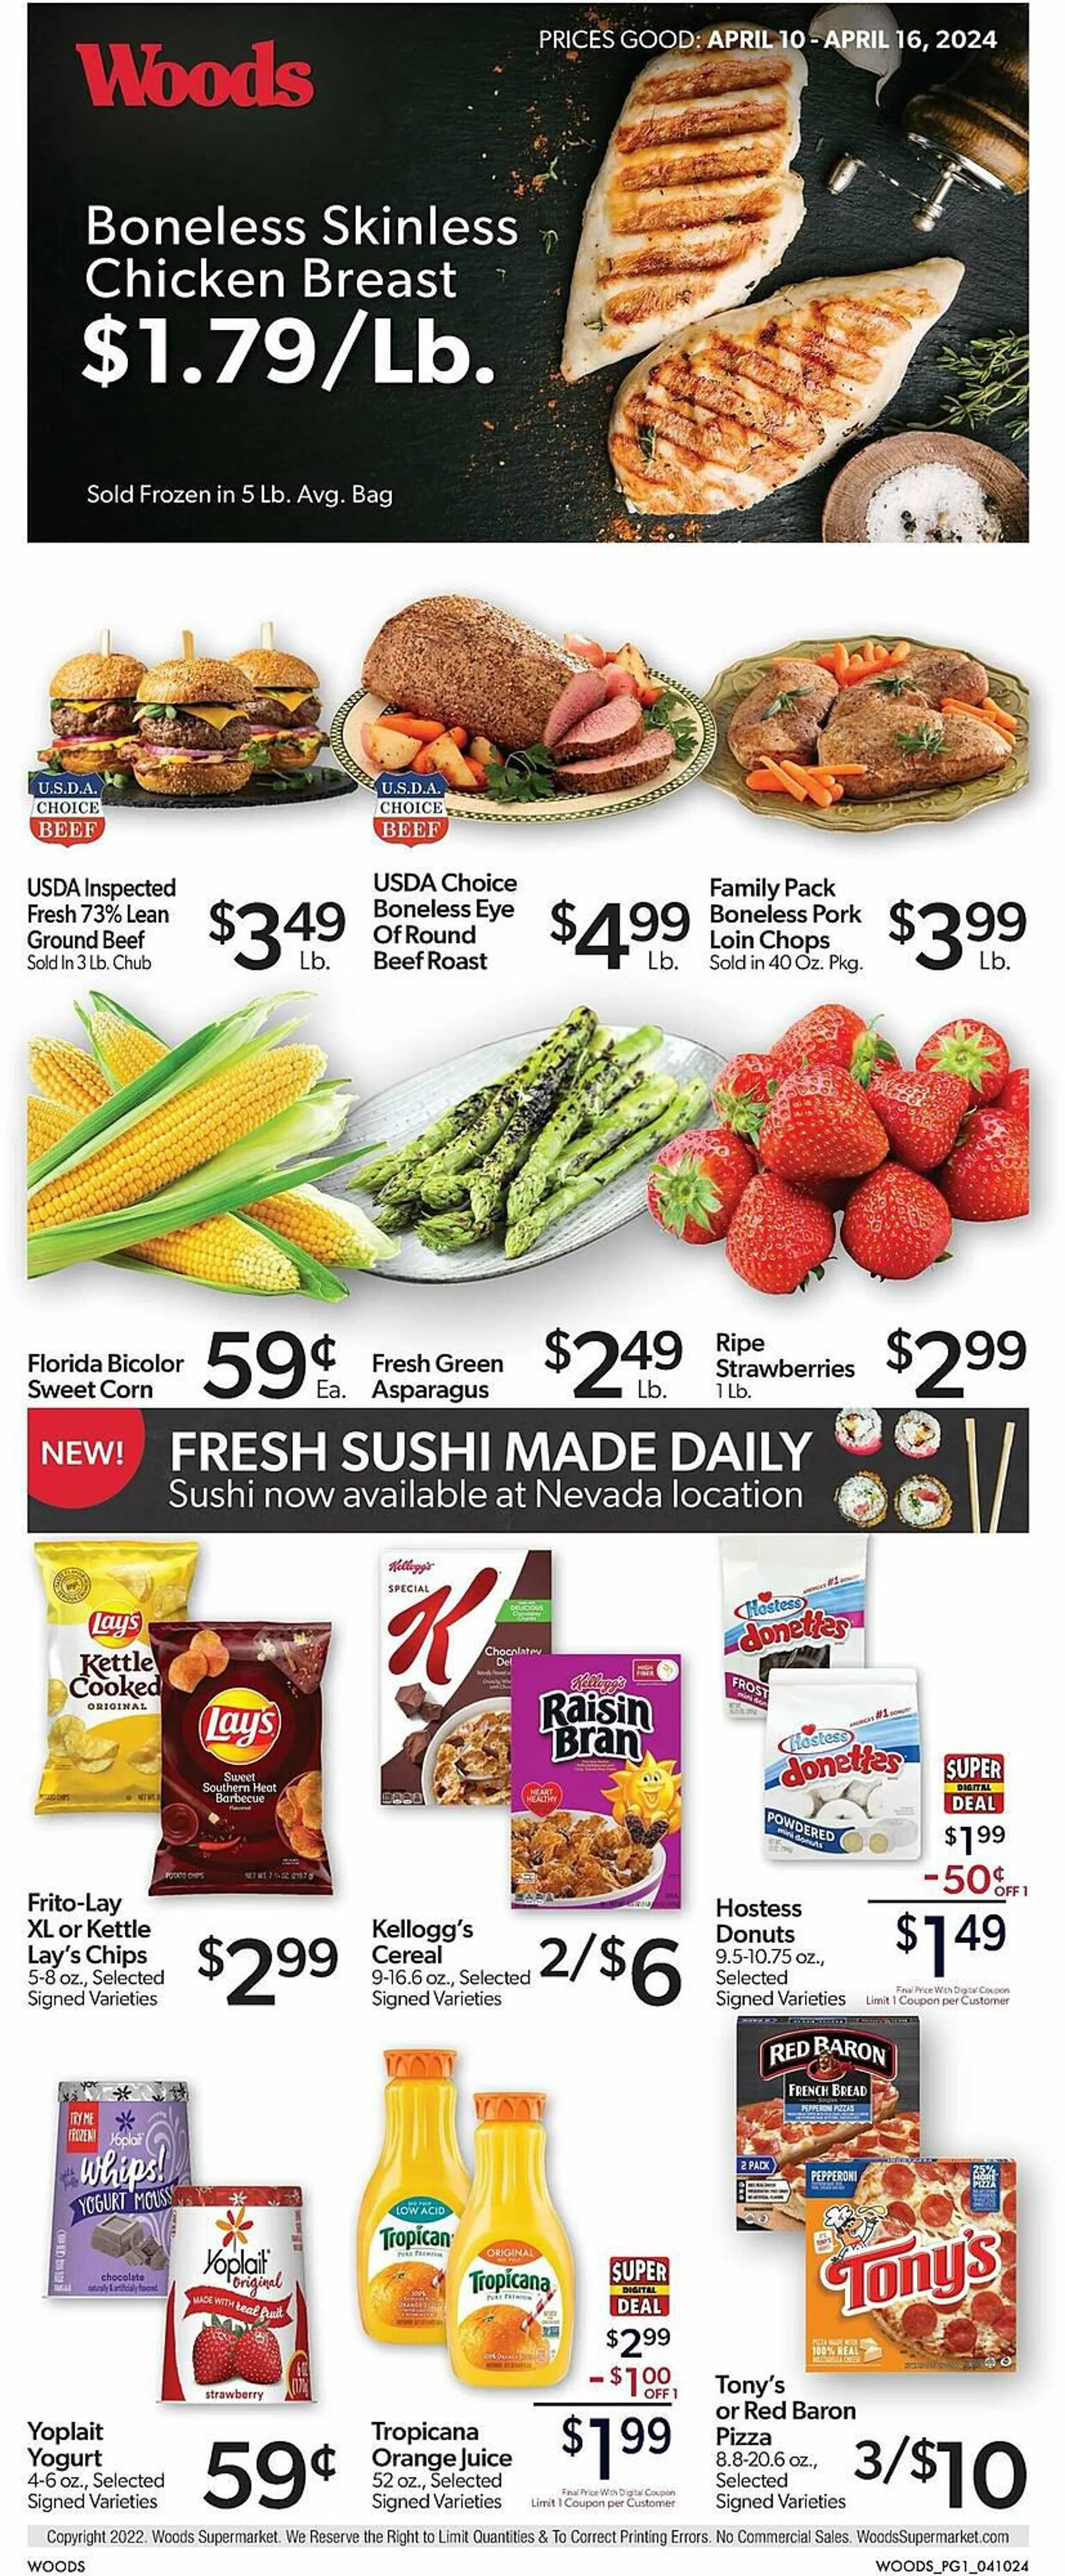 Weekly ad Woods Supermarket Weekly Ad from April 10 to April 16 2024 - Page 